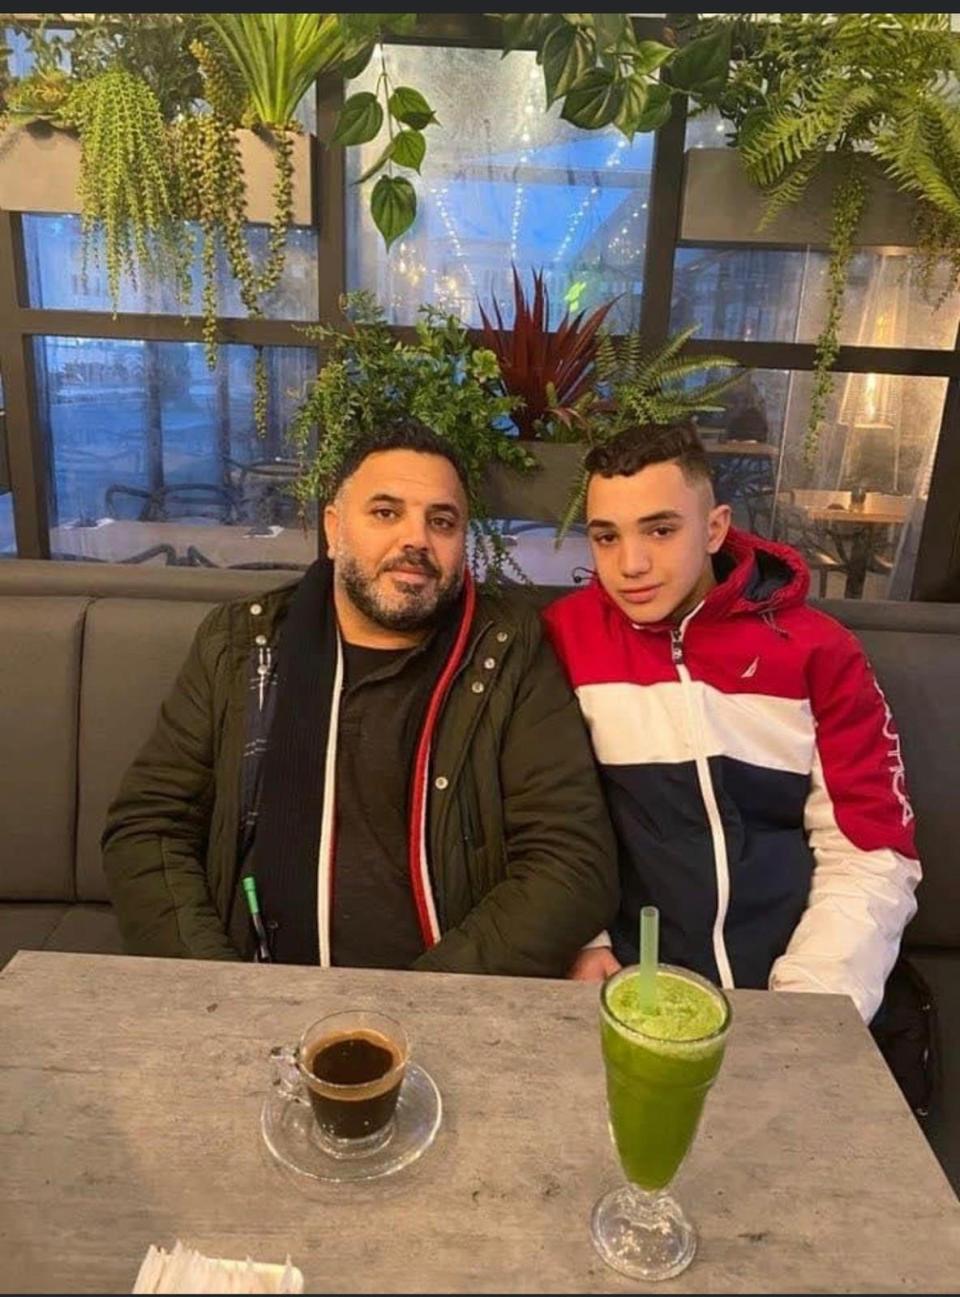 Muamar Orabi Nakhla with this son, Amal Nakhla. Amal is one of the youngest Palestinian prisoners being held on secret charges in an Israeli prison. He has a serious neurological condition and his family is fighting to free him.